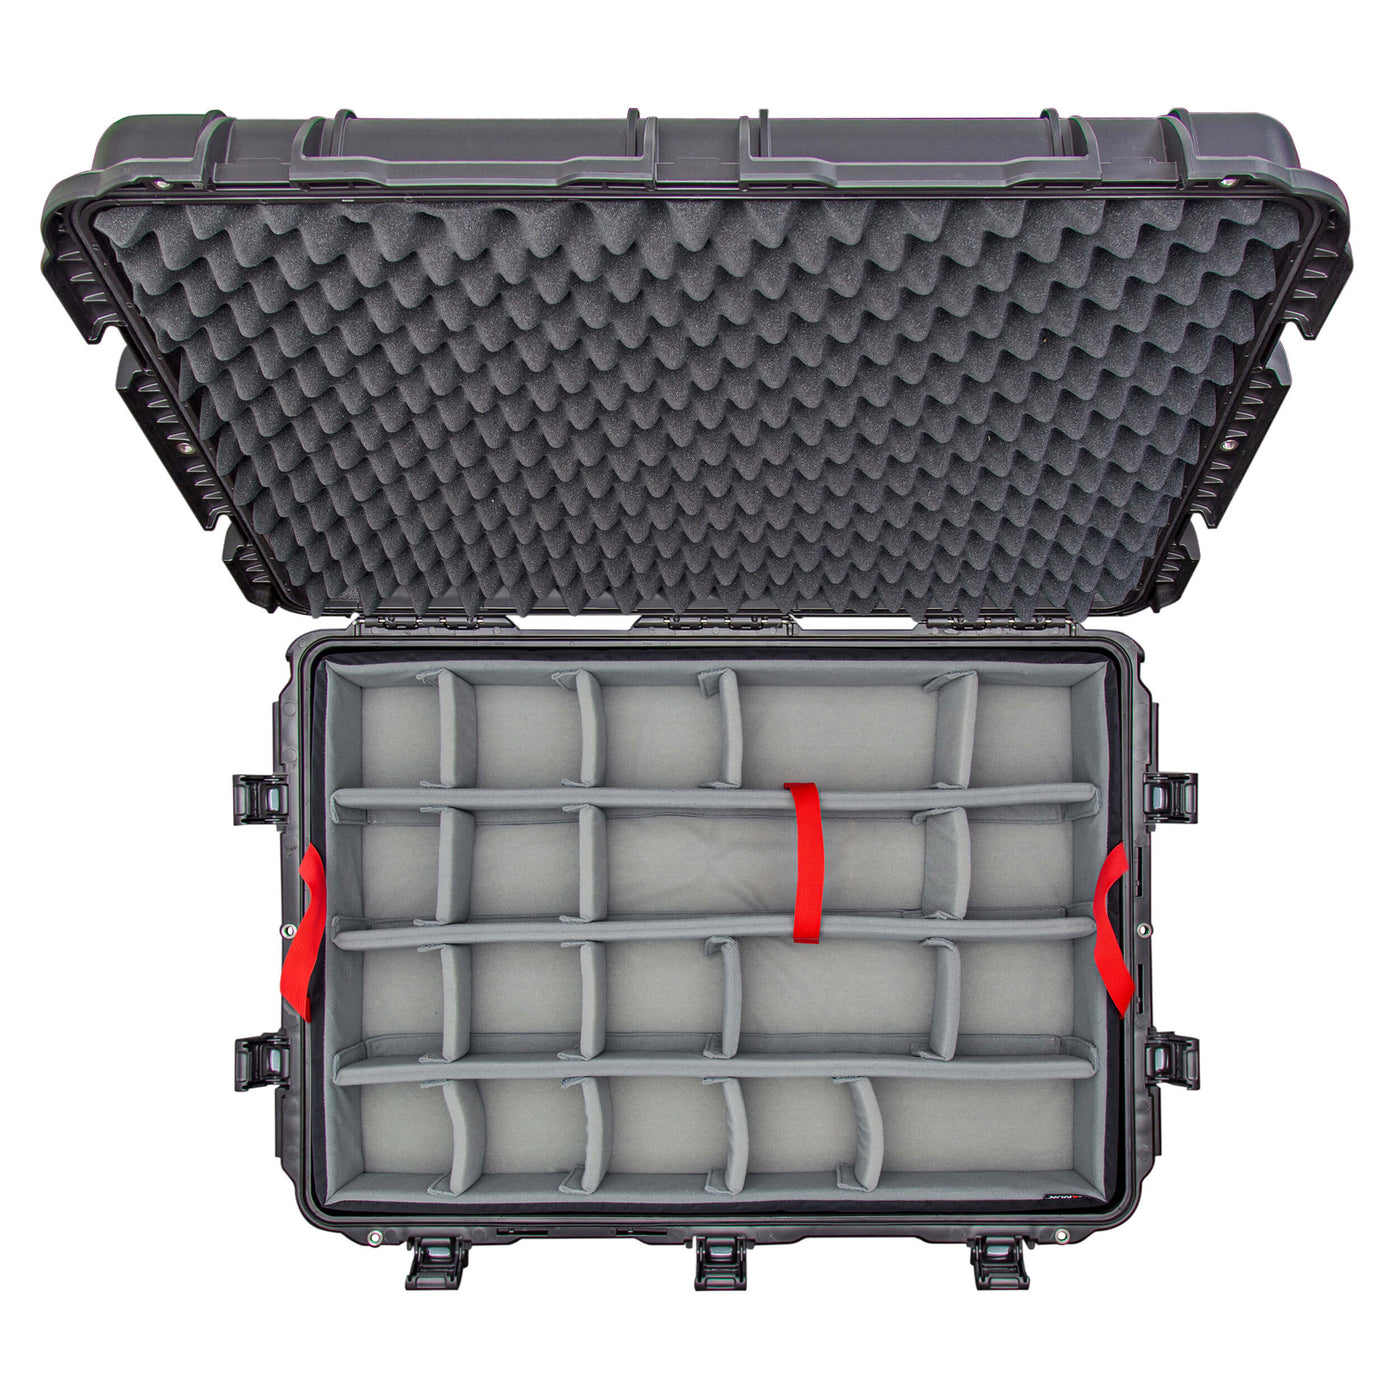 NANUK 975T with Padded Dividers Top Tray